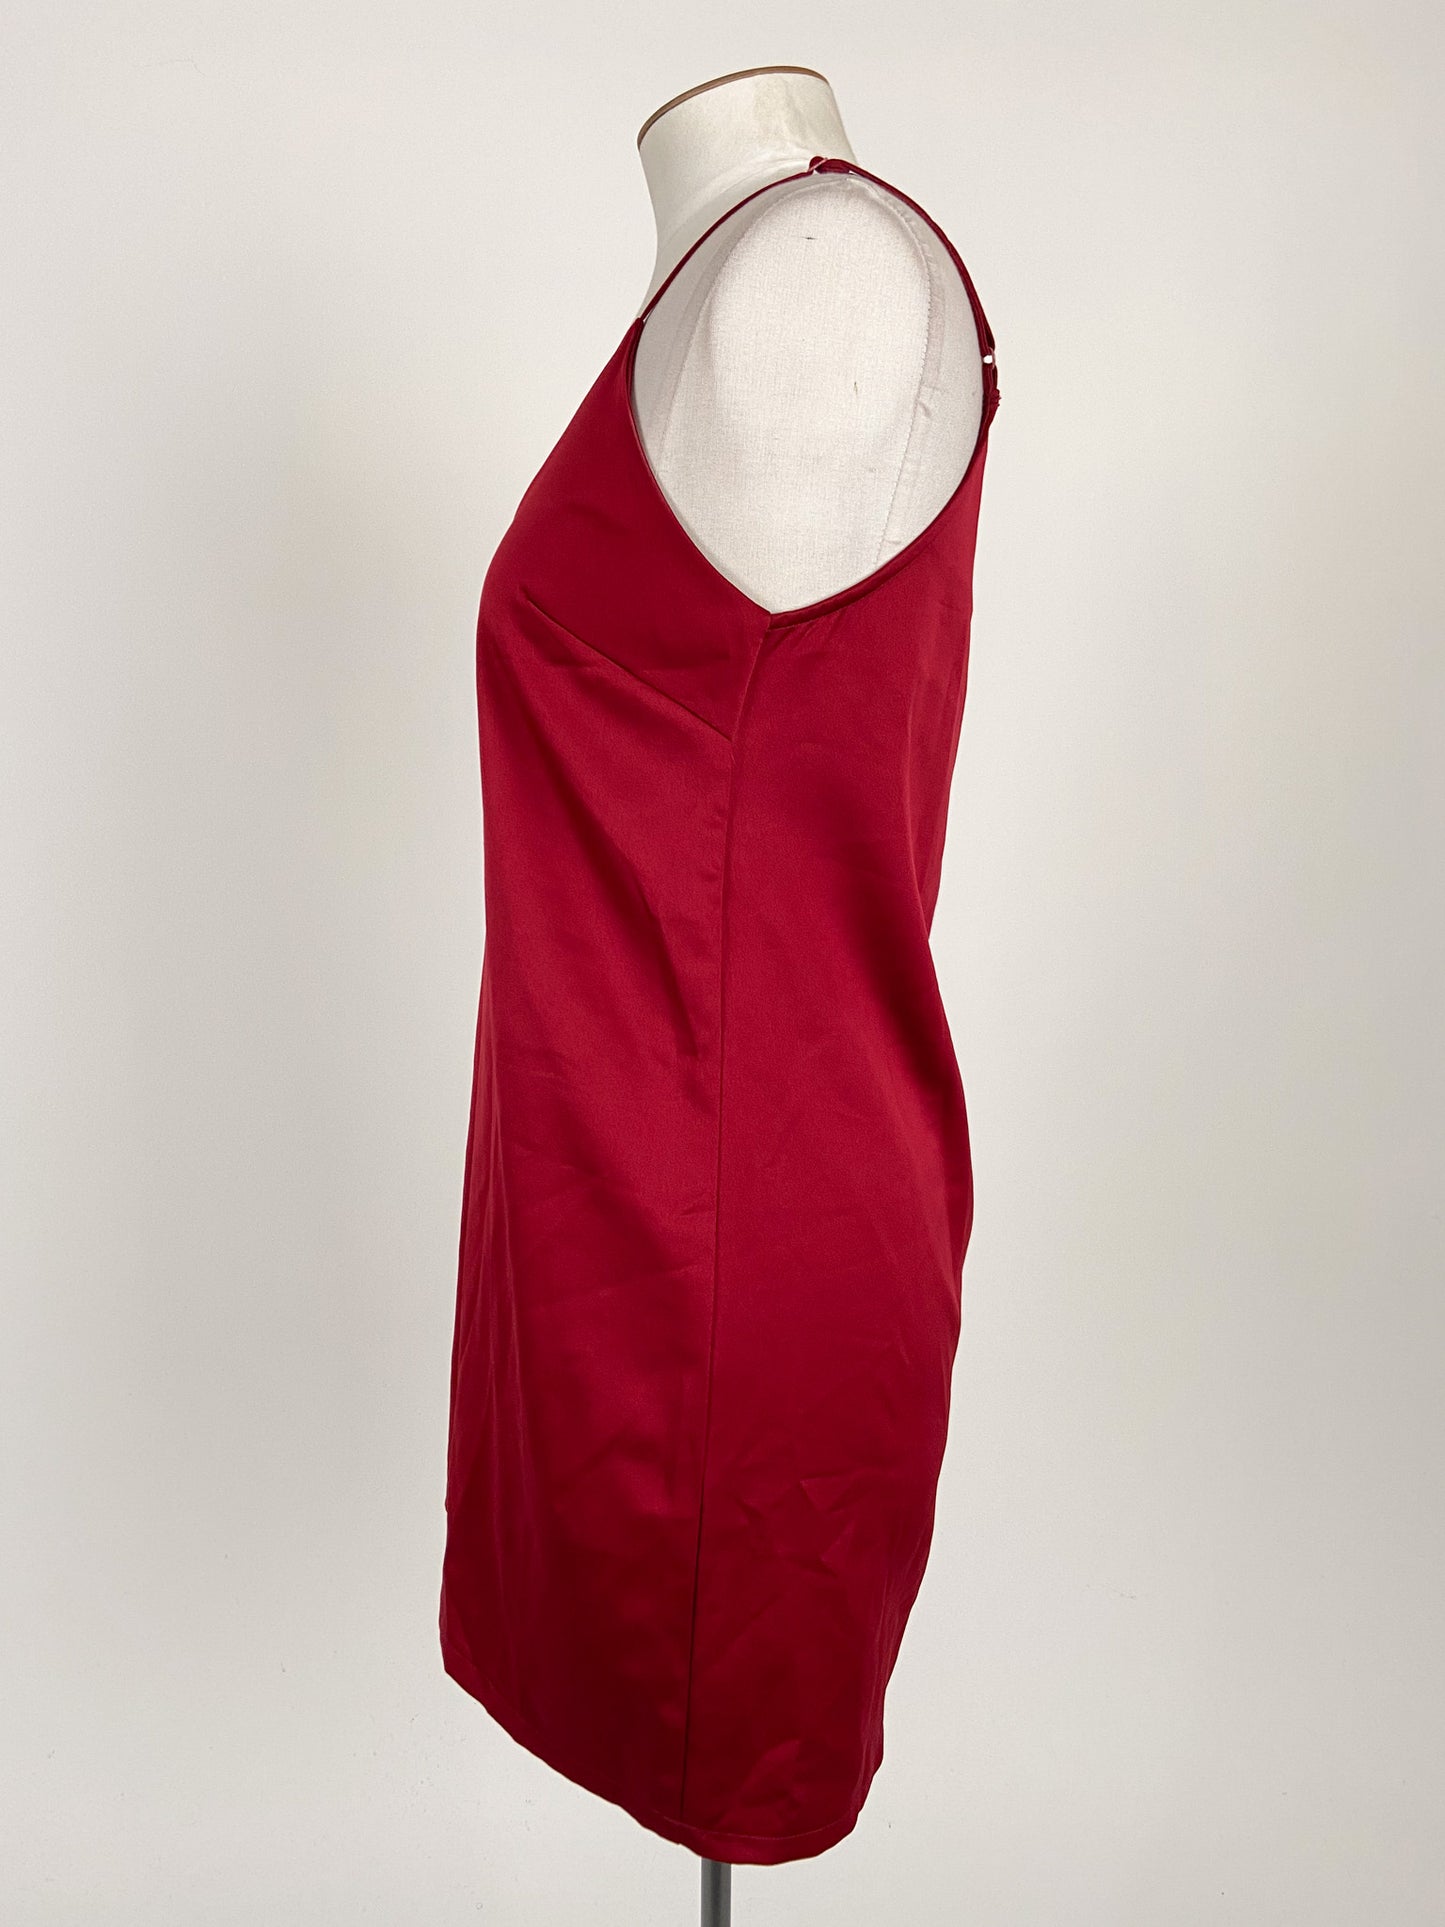 Missguided | Red Cocktail Dress | Size 12